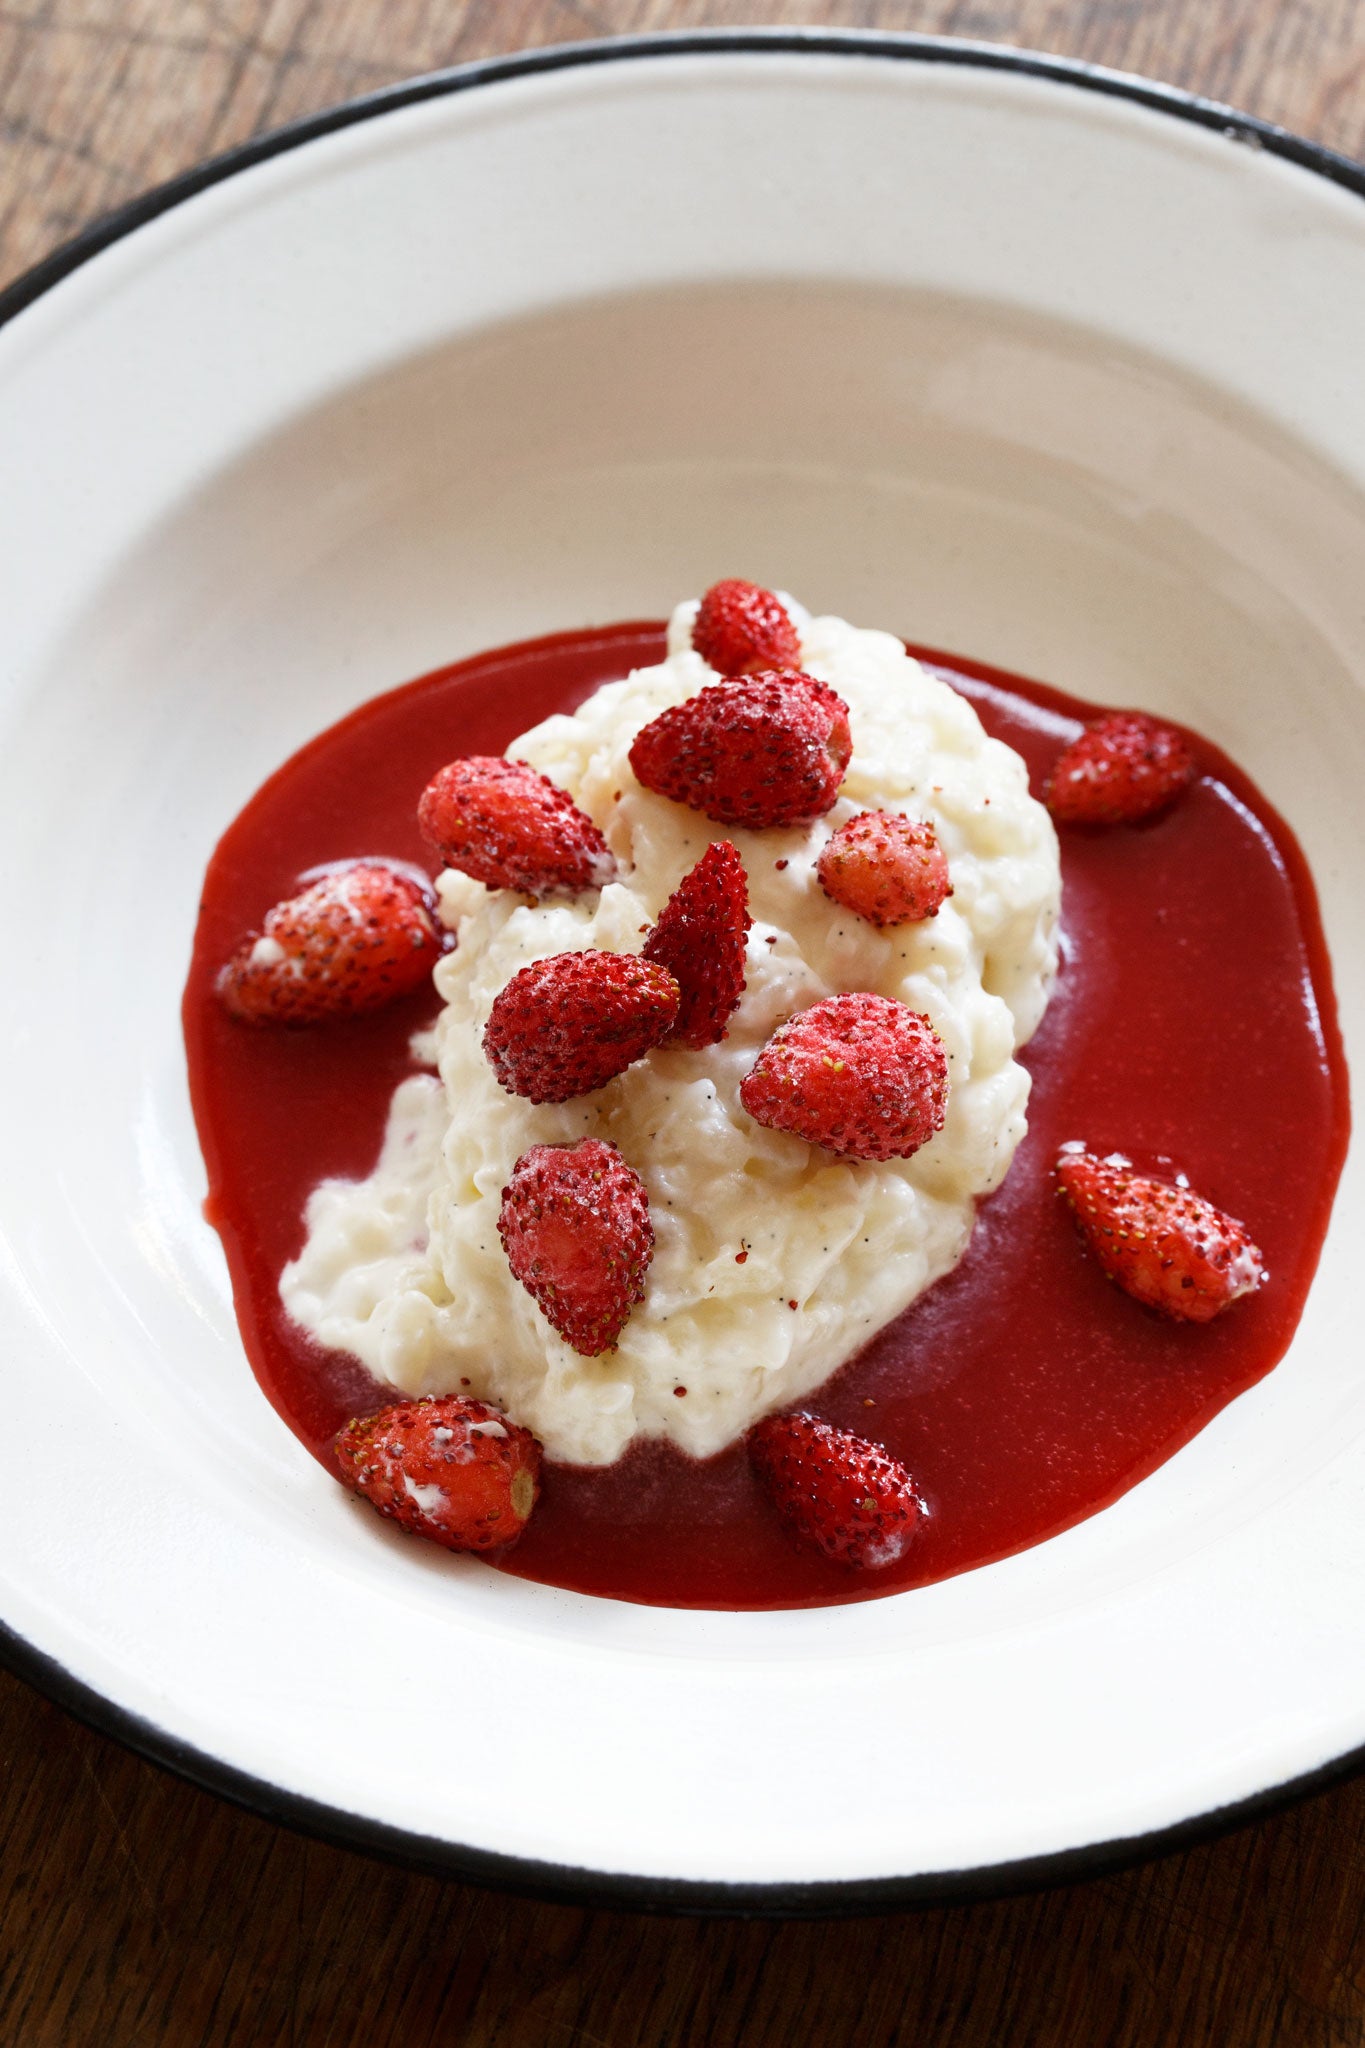 Jersey rice pudding with wild strawberries